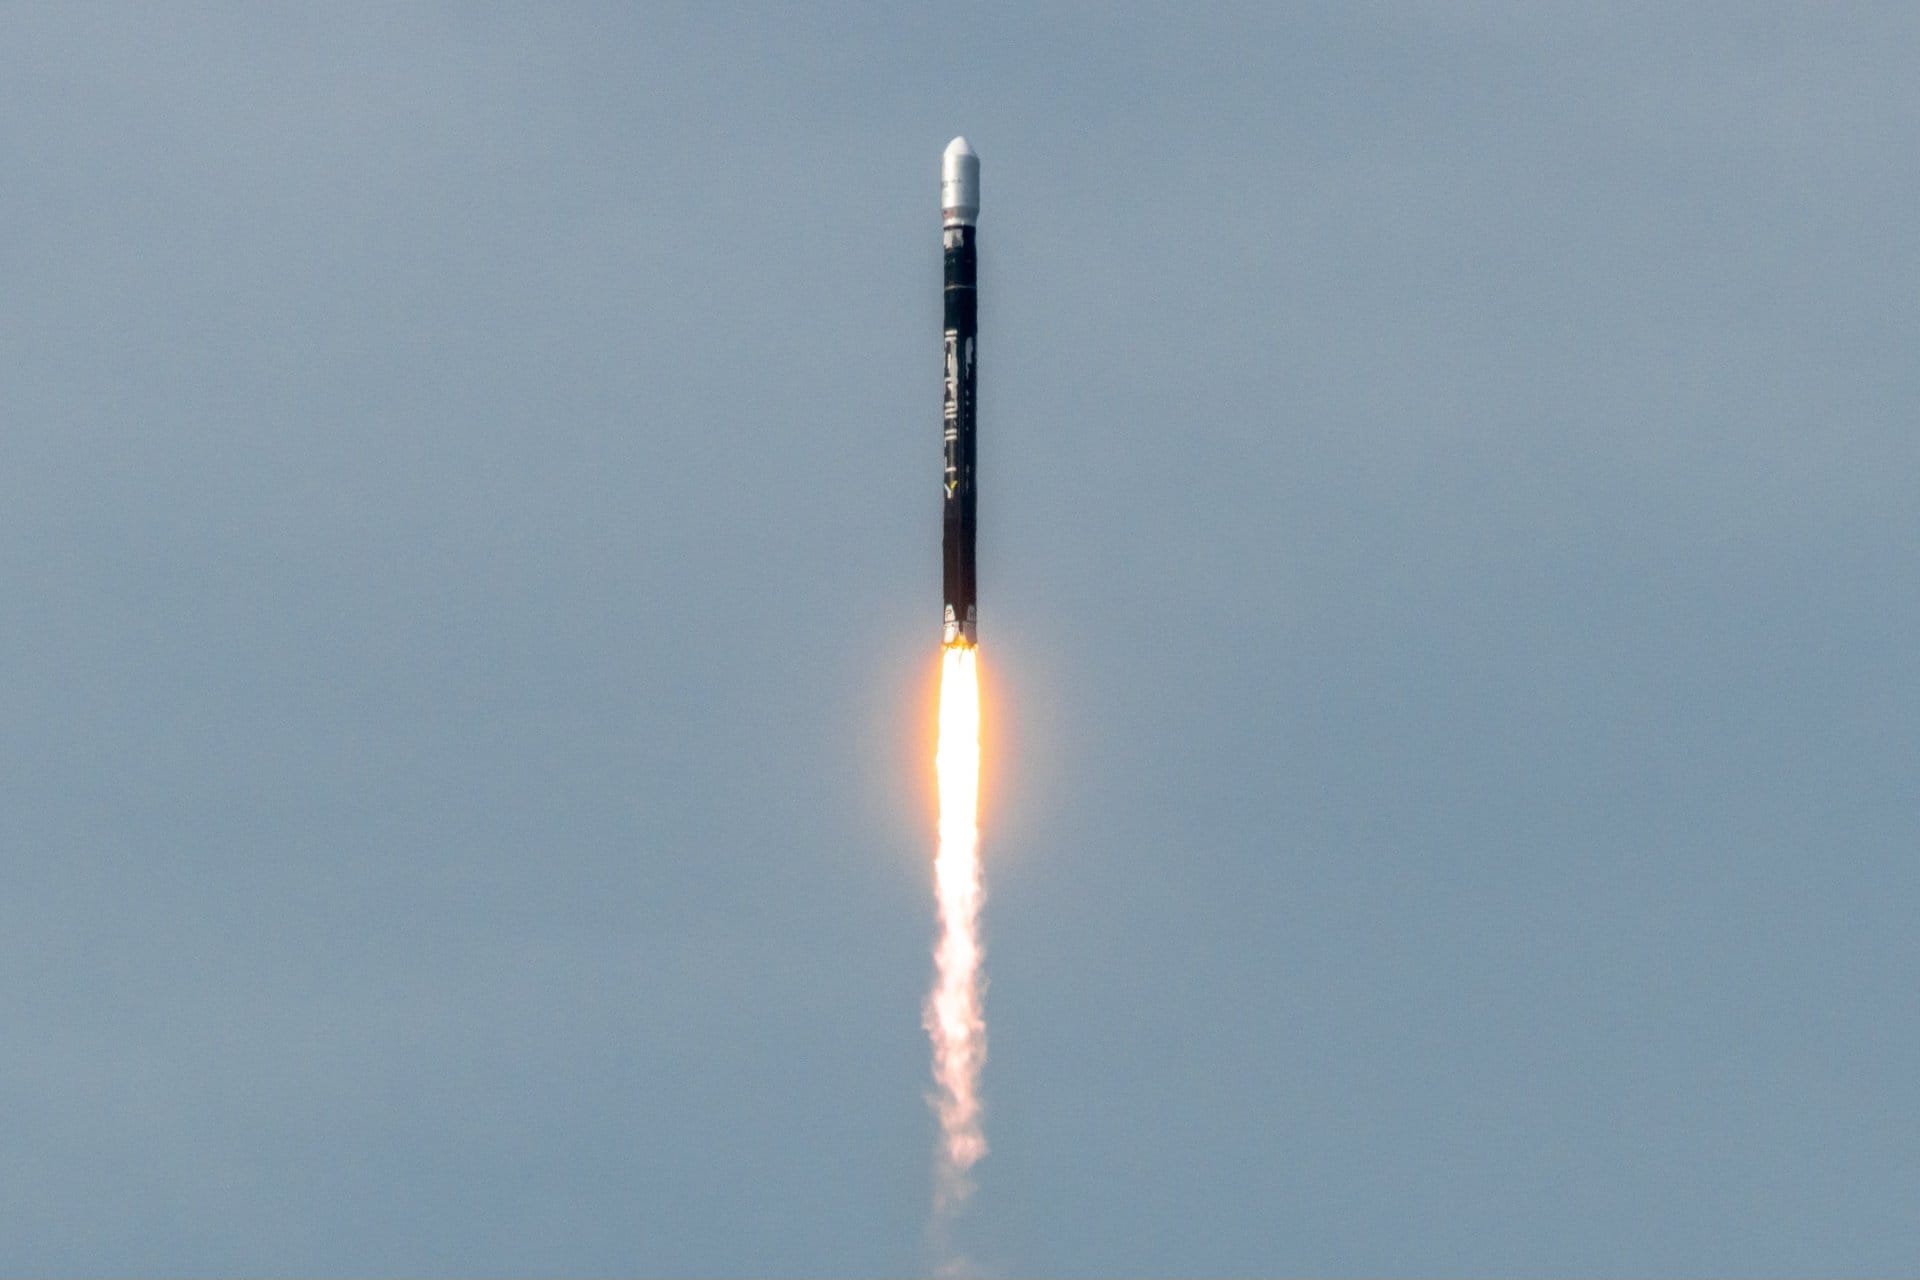 Firefly Alpha during first-stage flight for Fly the Lightning. ©Firefly Aerospace/Trevor Mahlmann